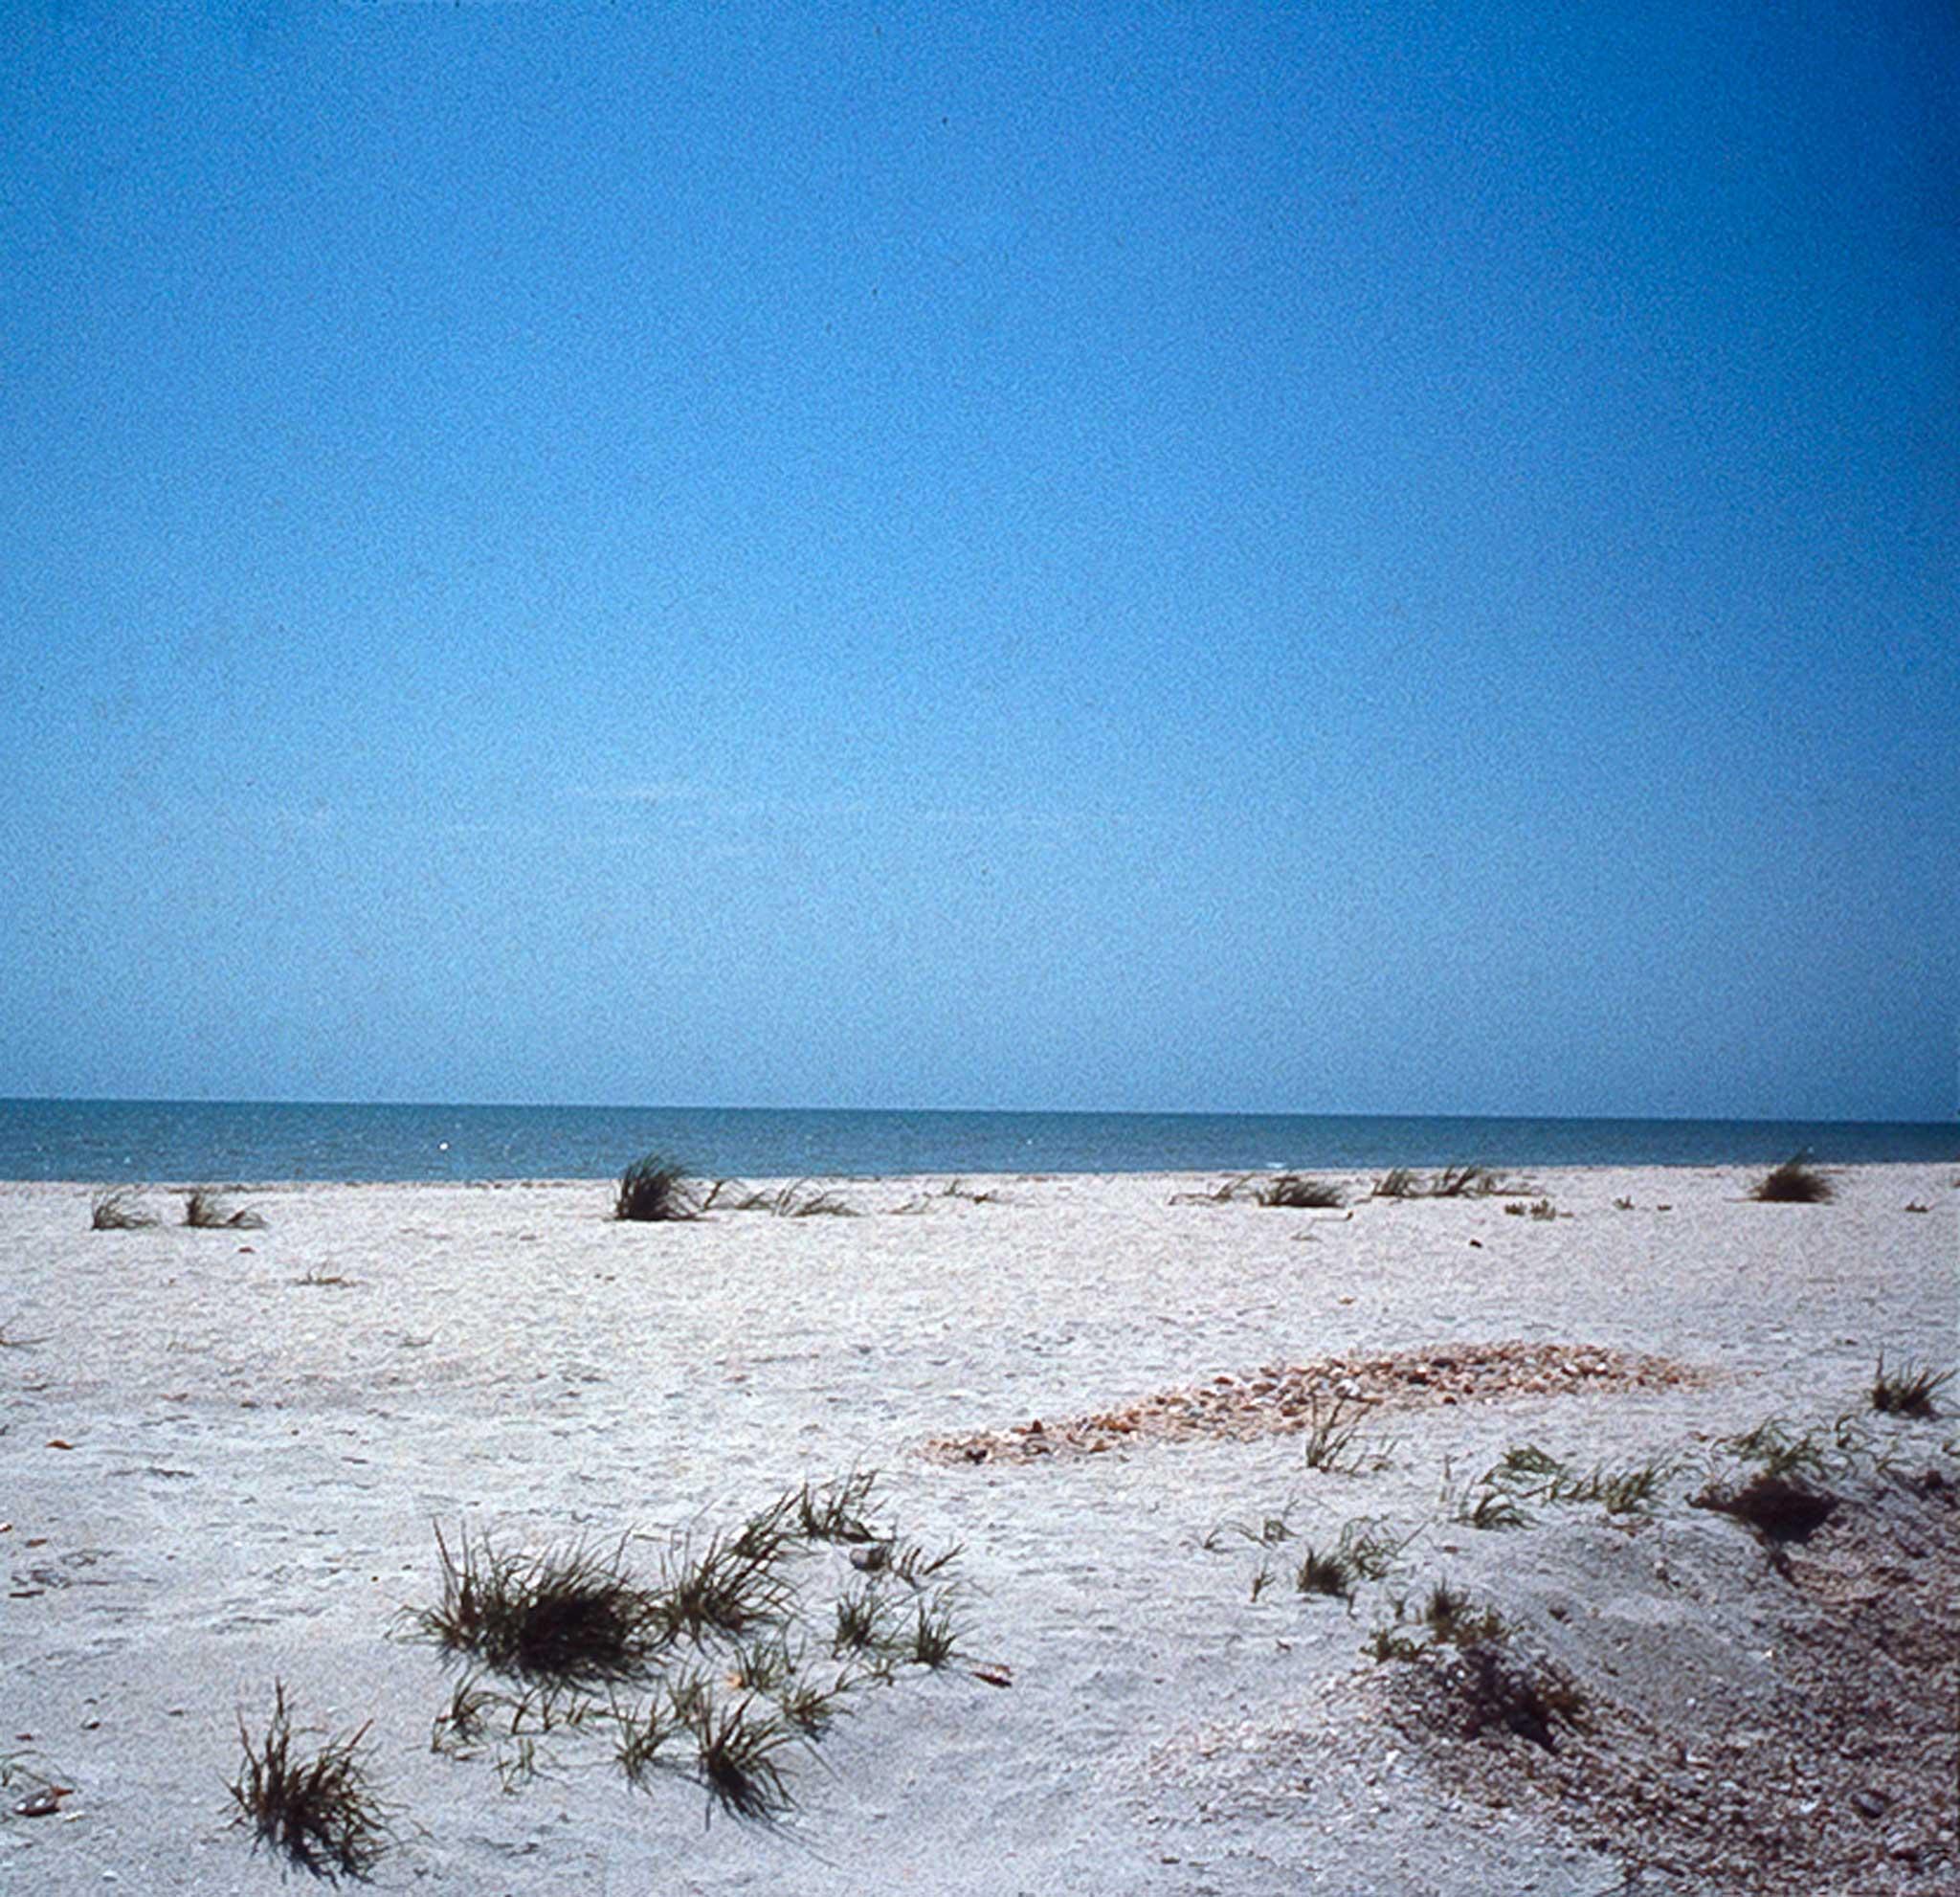 a white sand beach with blue sky and ocean in the background